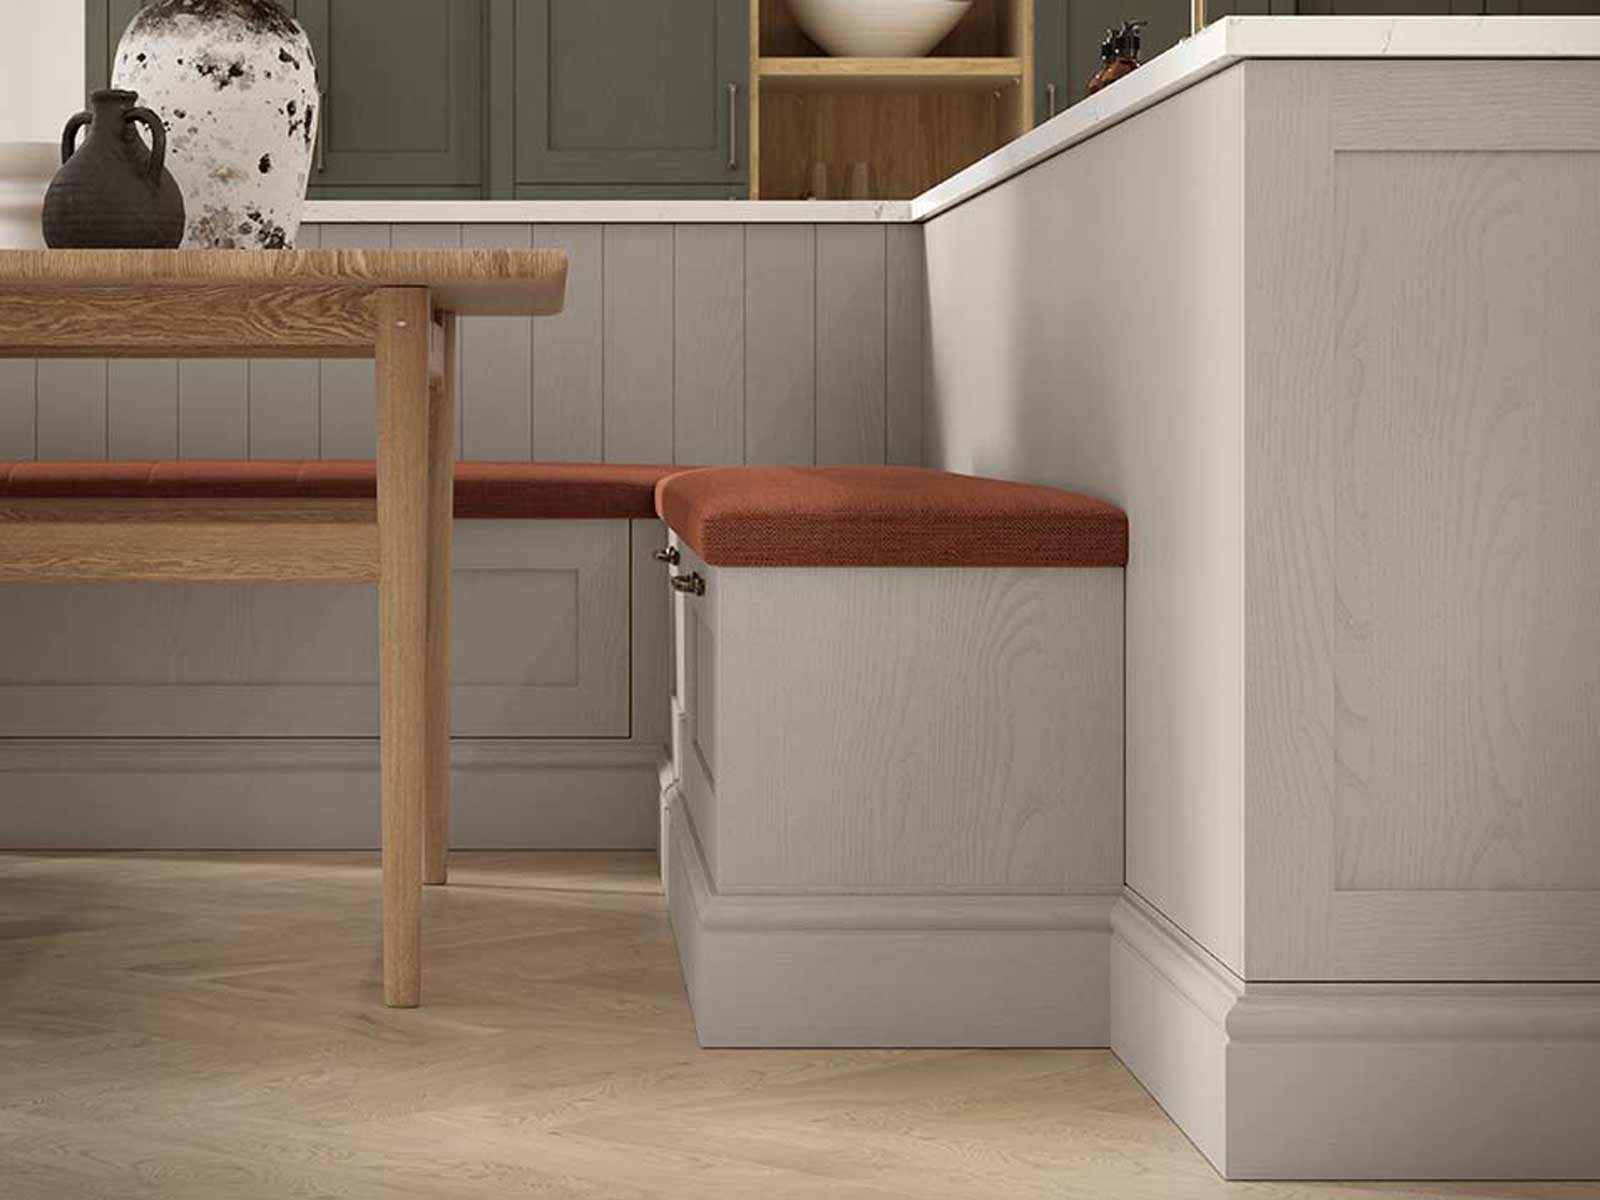 Hardwick kitchen benches with shaker cabinets